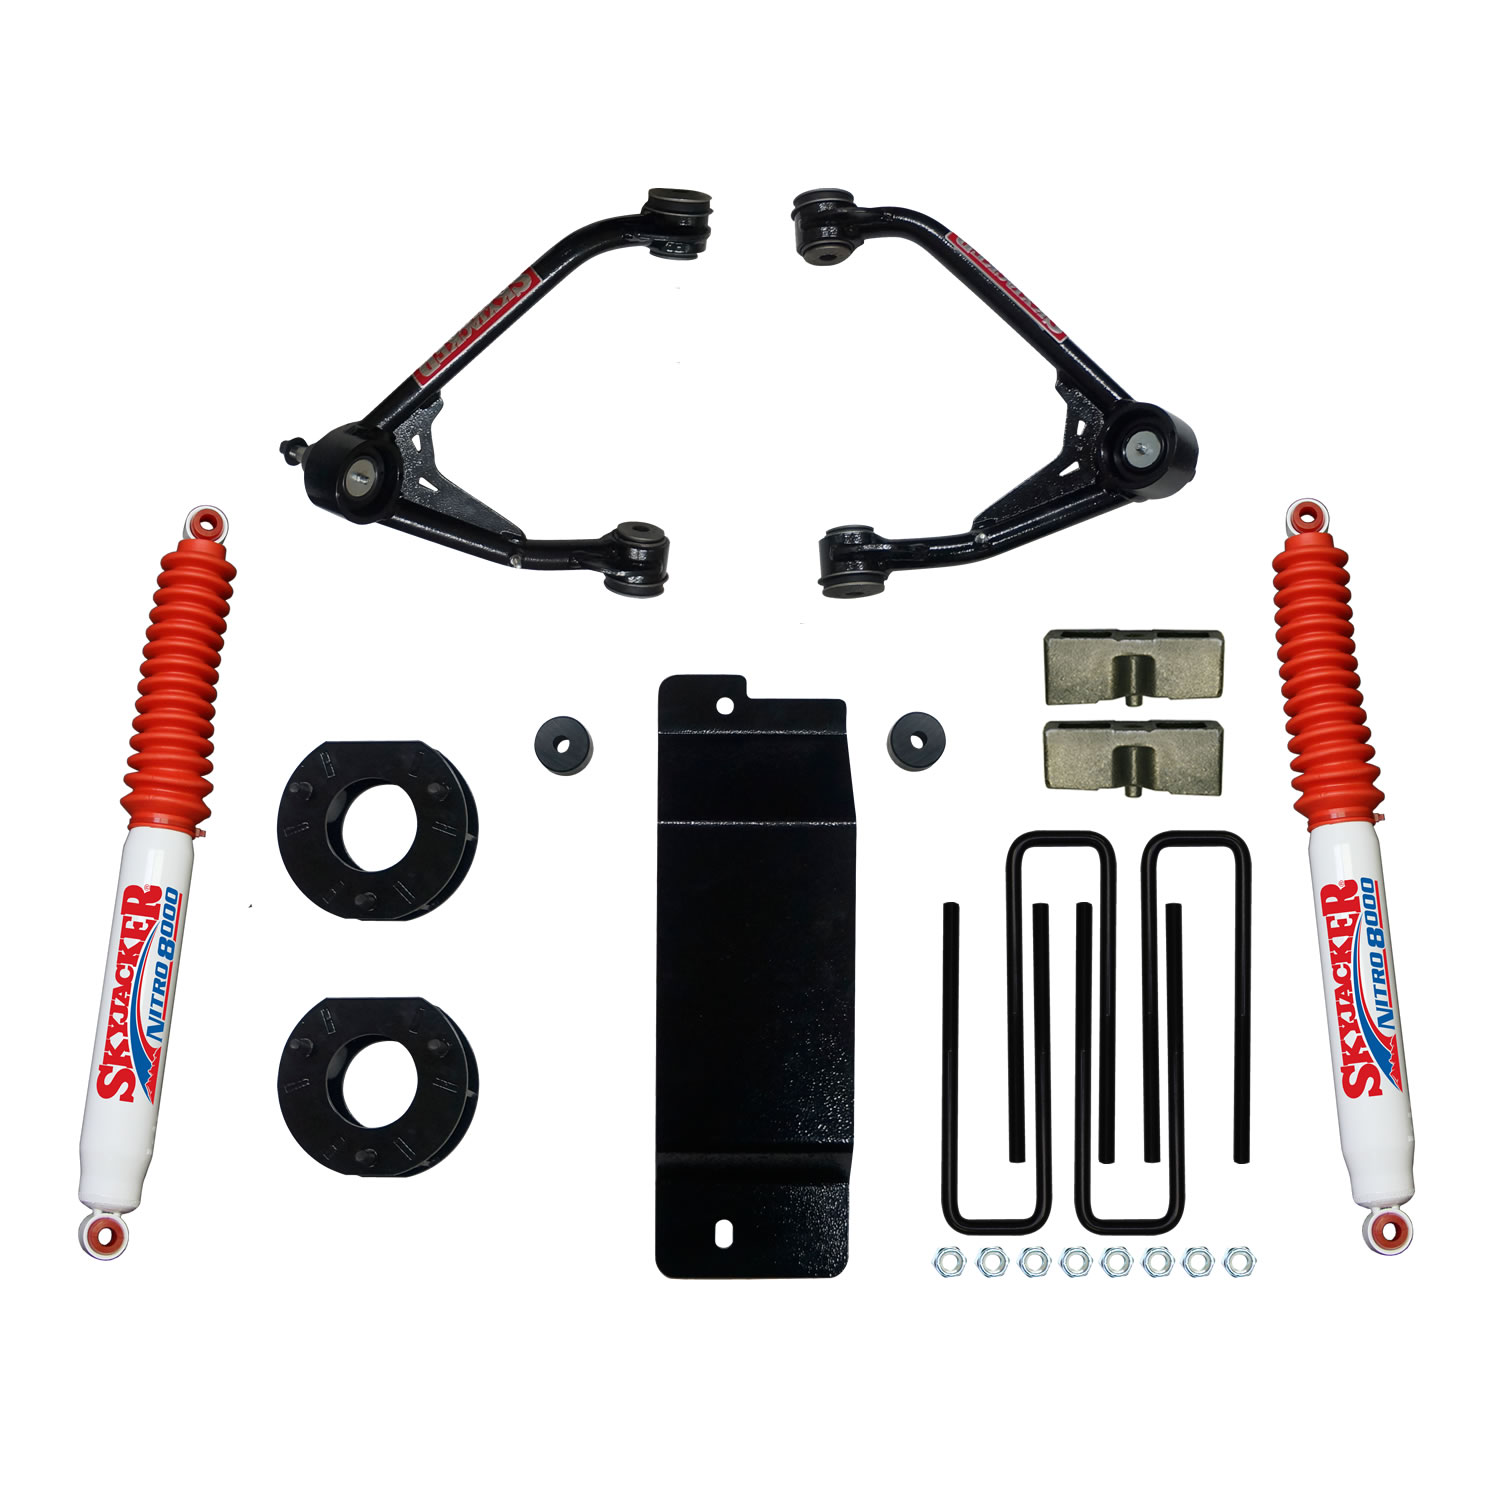 3.500-4.000 In. Upper Control Arm Lift Kit with Nitro8000 Rear Shocks